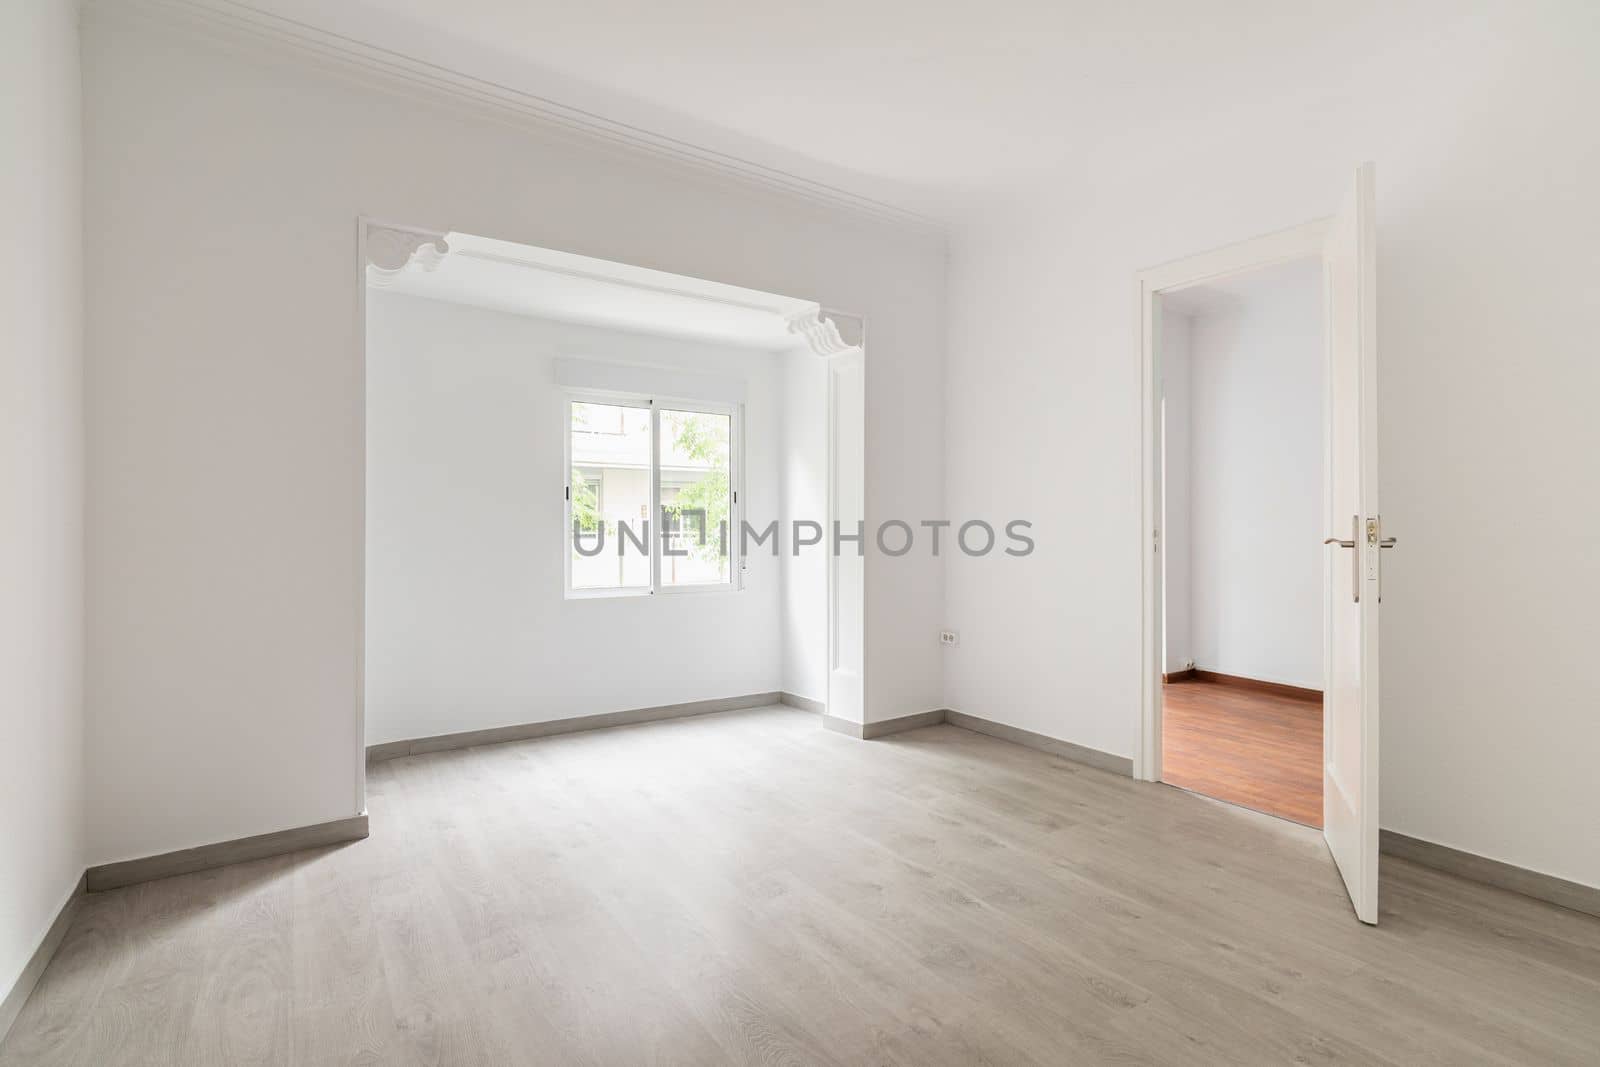 An empty spacious room, sunlight penetrates through the window during daylight hours. On floor there is wooden parquet in gray color. In open doorway is corridor to the rest of the apartment. by apavlin